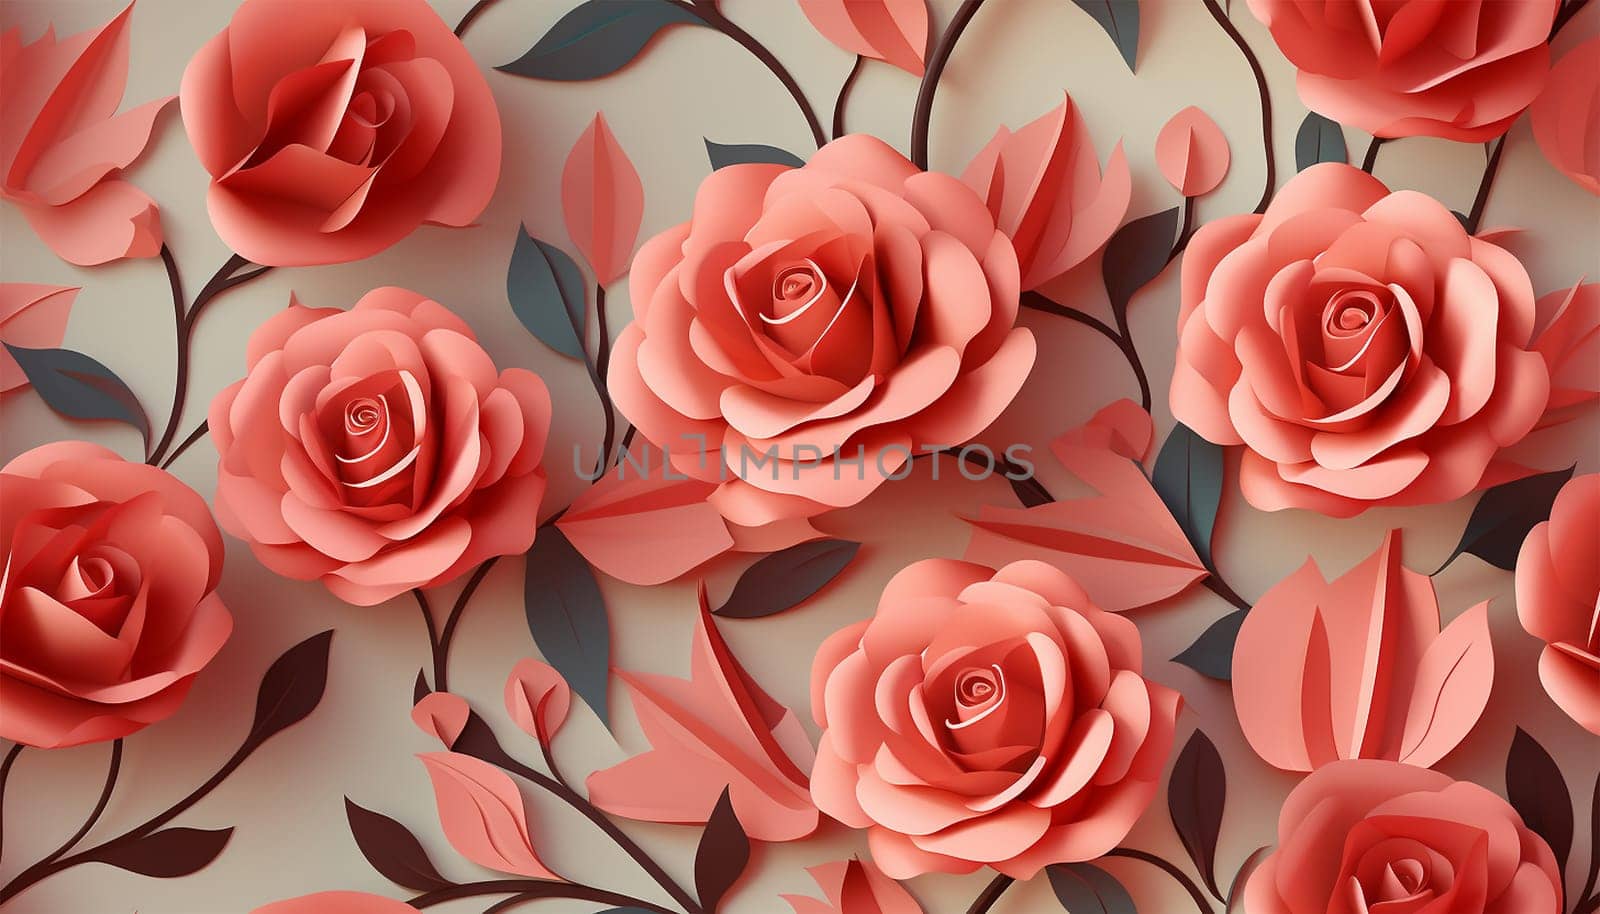 Pastel colored rose pattern background. Seamless pattern floral beautiful pink pastel Rose flowers vintage abstract background.pink illustration hand drawing dry watercolor.for fabric textile design or Product packaging Valentine